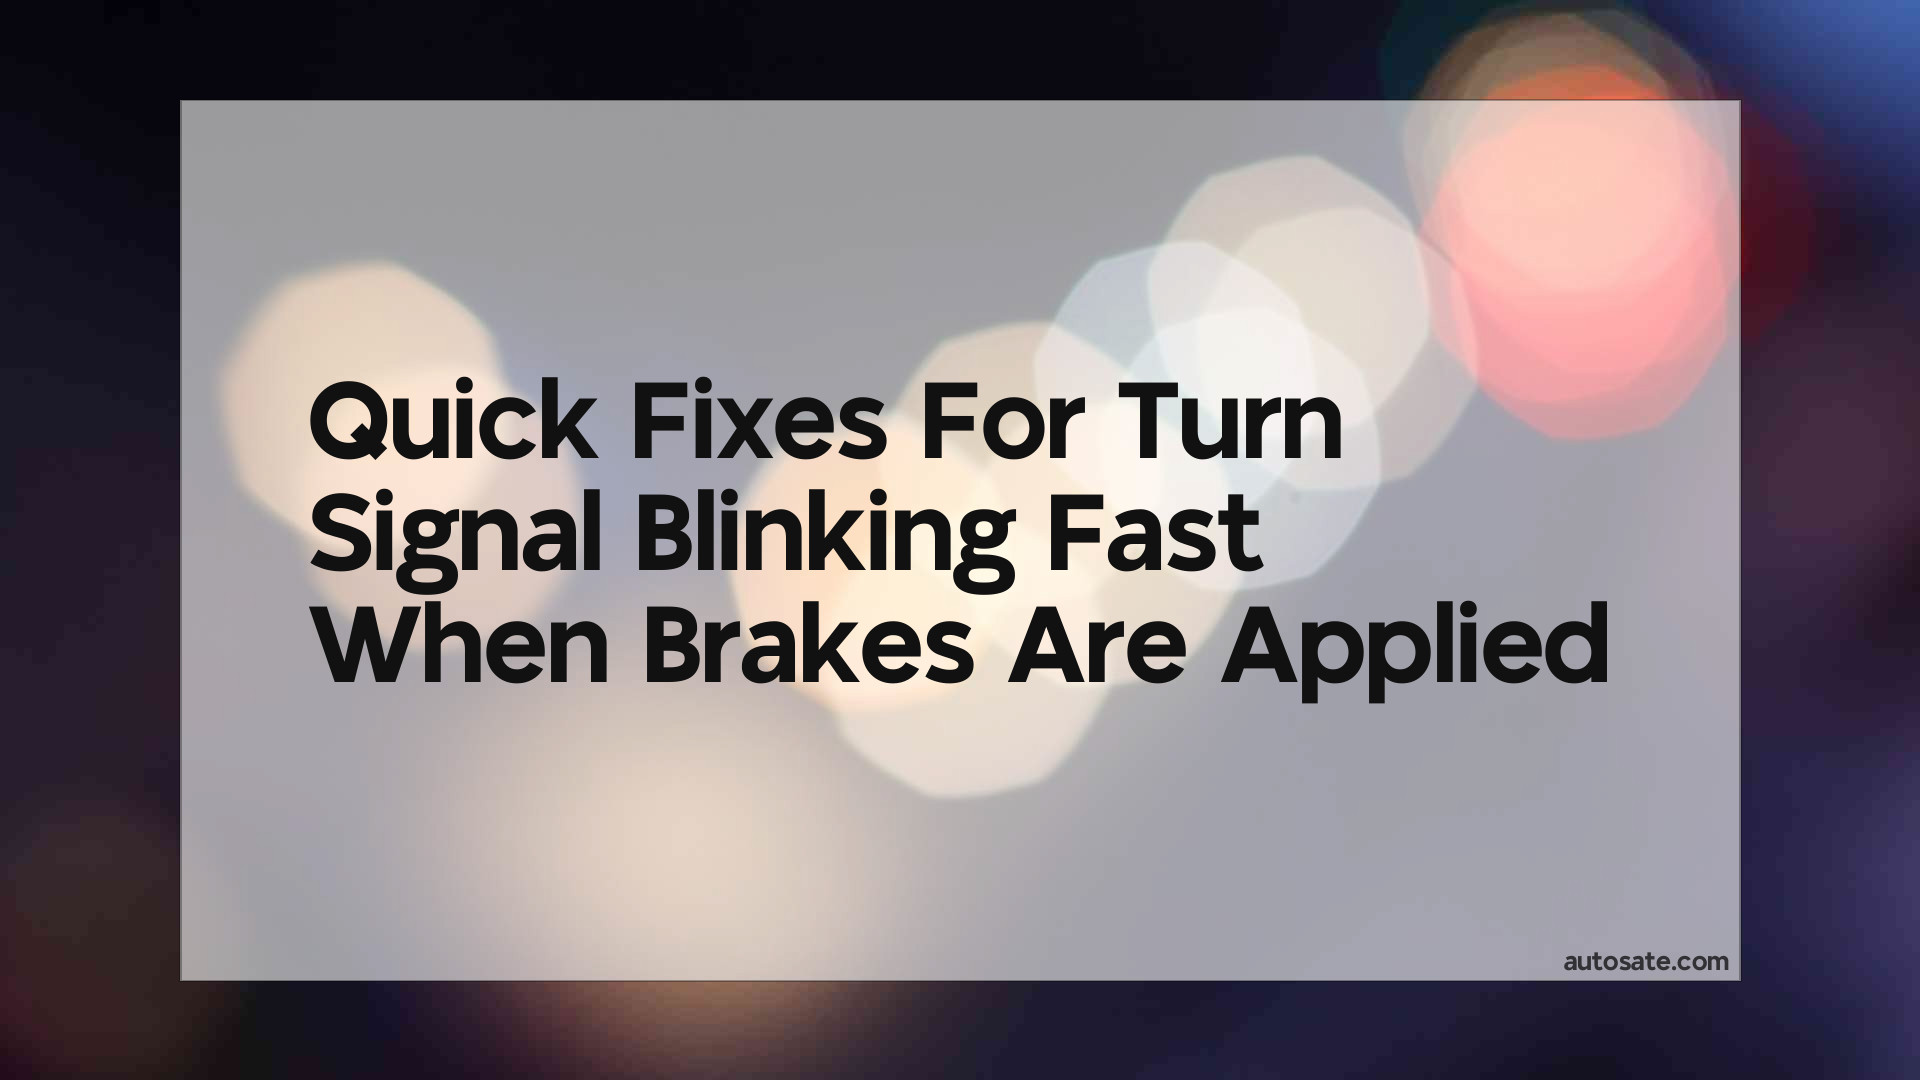 Quick Fixes For Turn Signal Blinking Fast When Brakes Are Applied